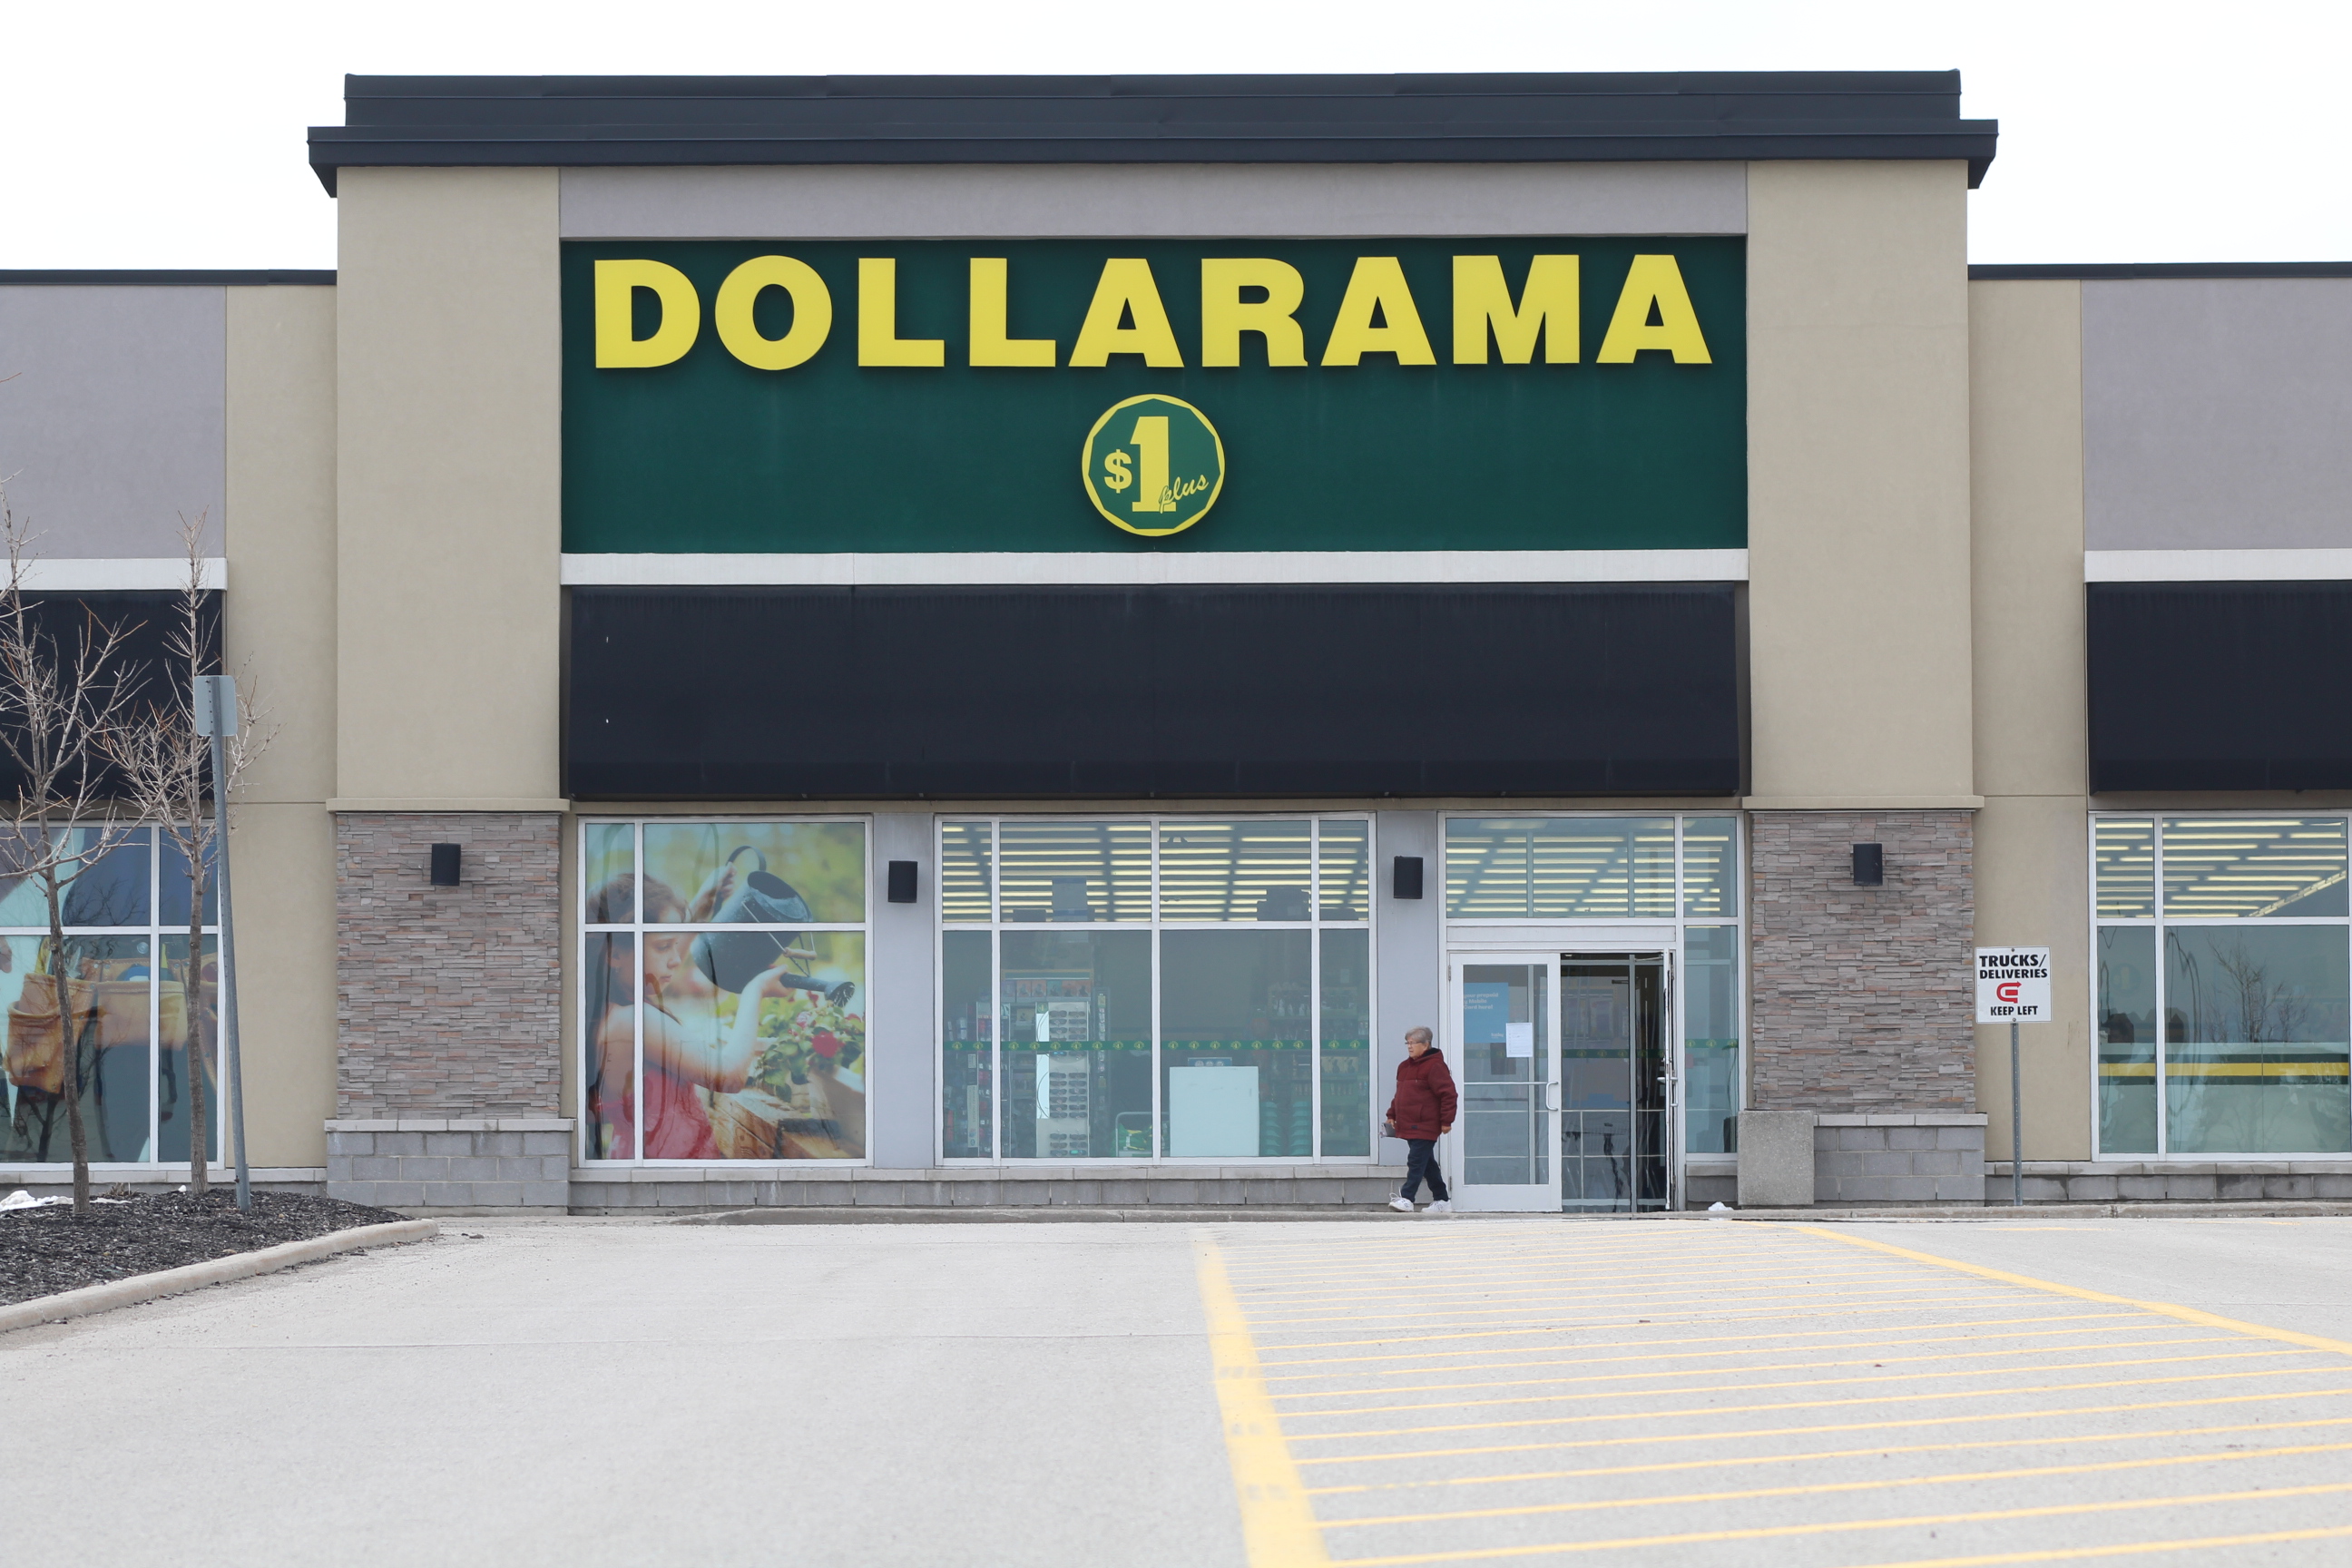 Employee at Newmarket No Frills tests positive for COVID-19 - Newmarket News